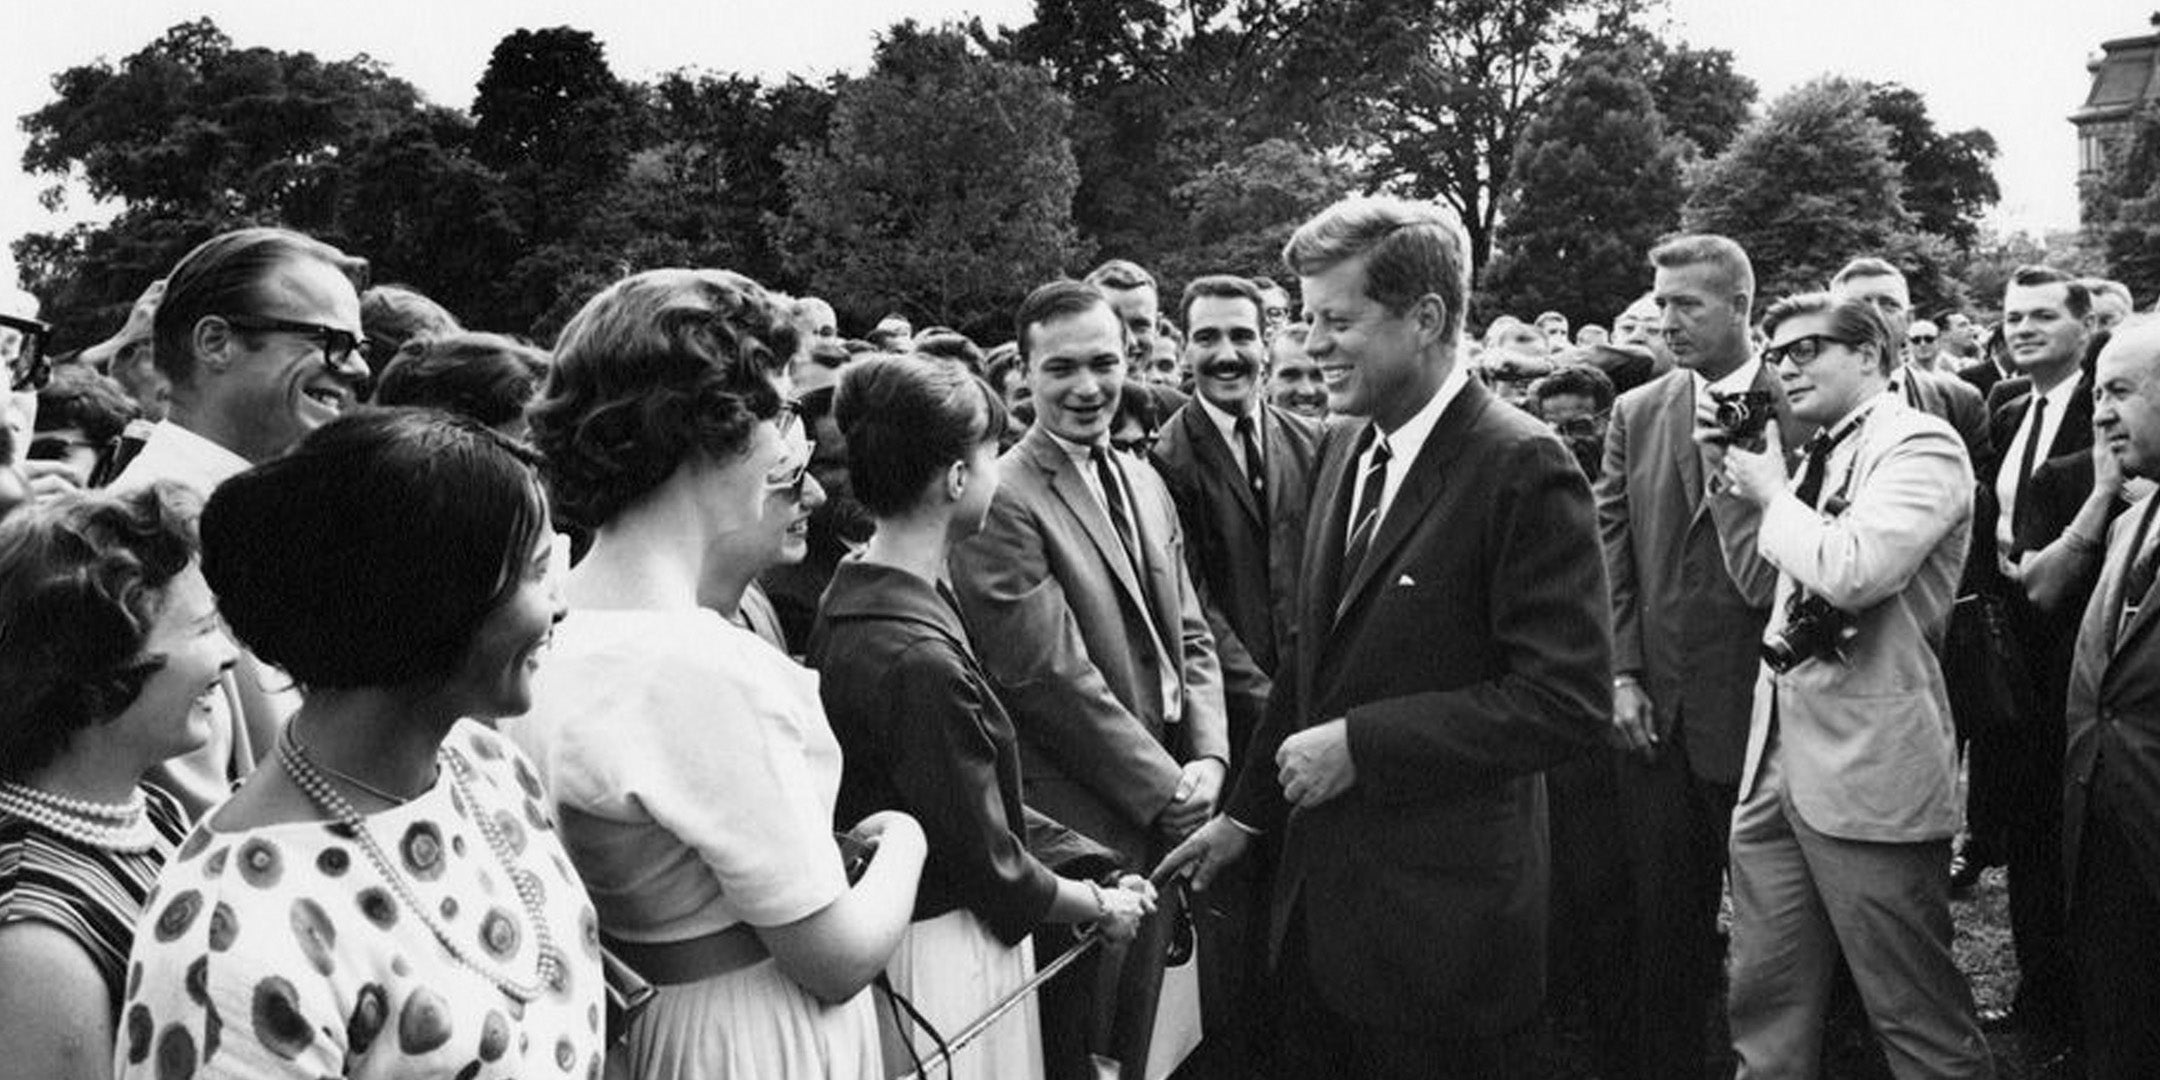 JFK greeting people in a crowd and smiling 